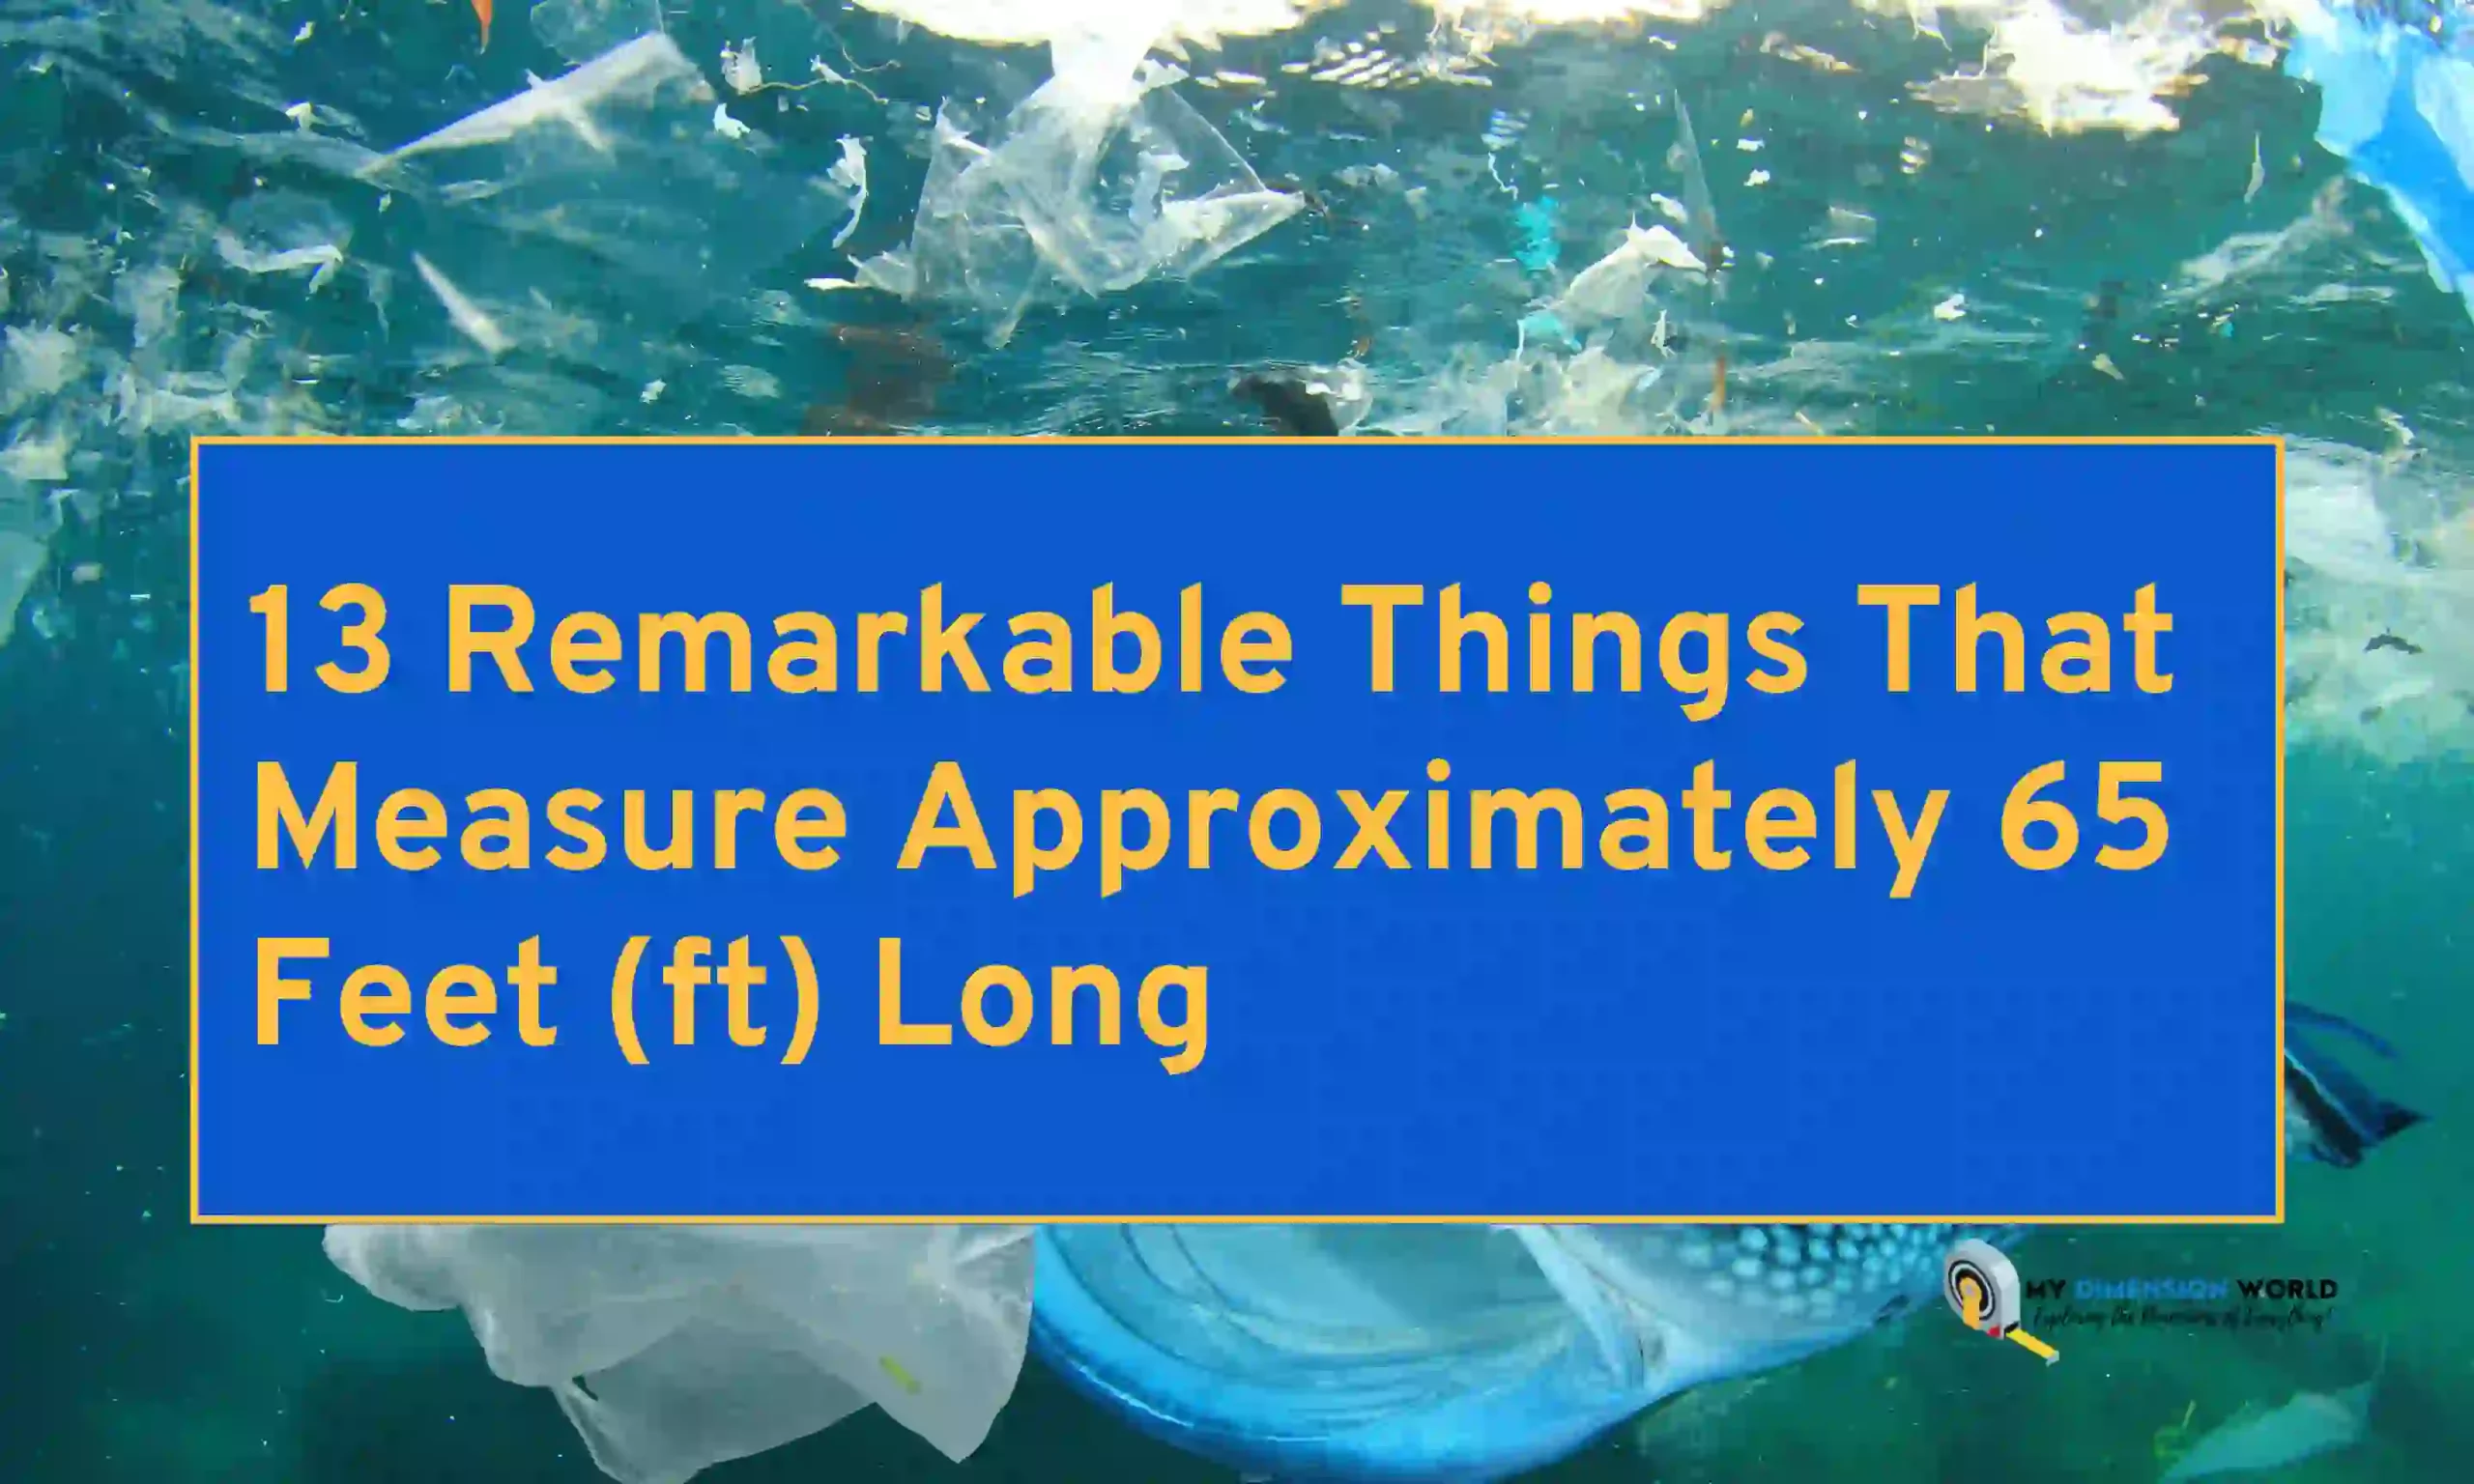 13 Remarkable Things That Measure Approximately 65 Feet (ft) Long